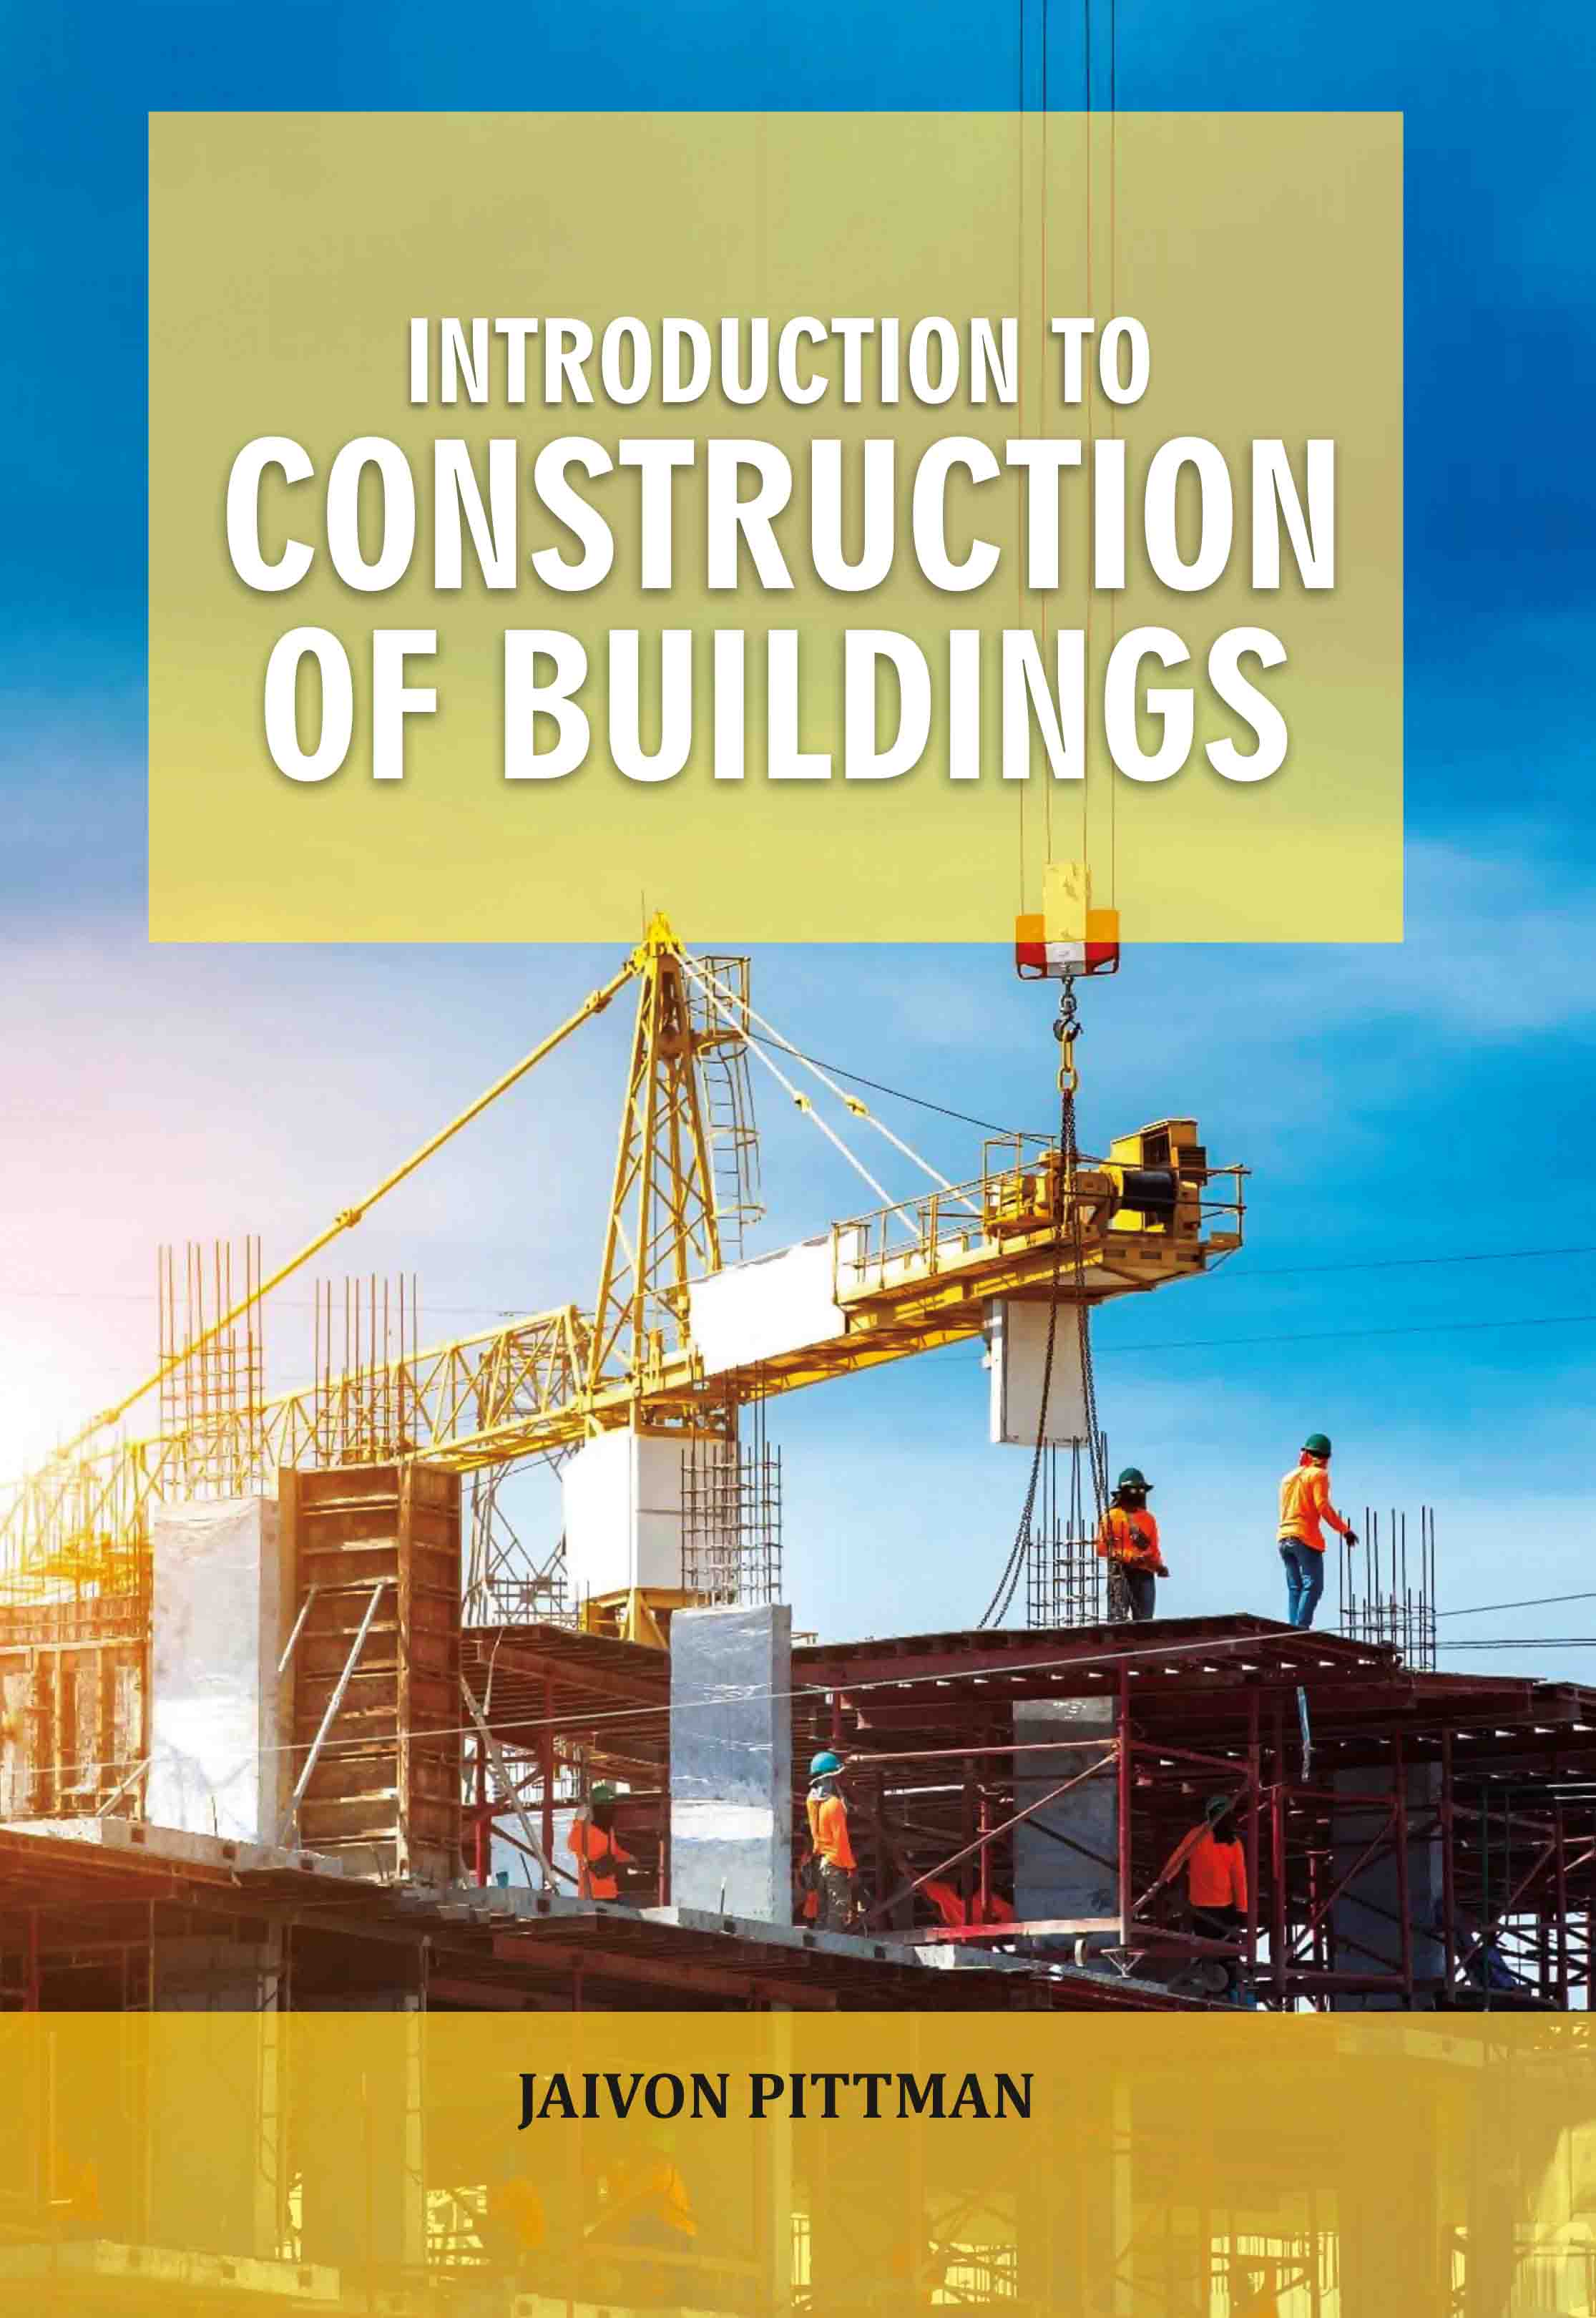 Introduction to Construction of Buildings